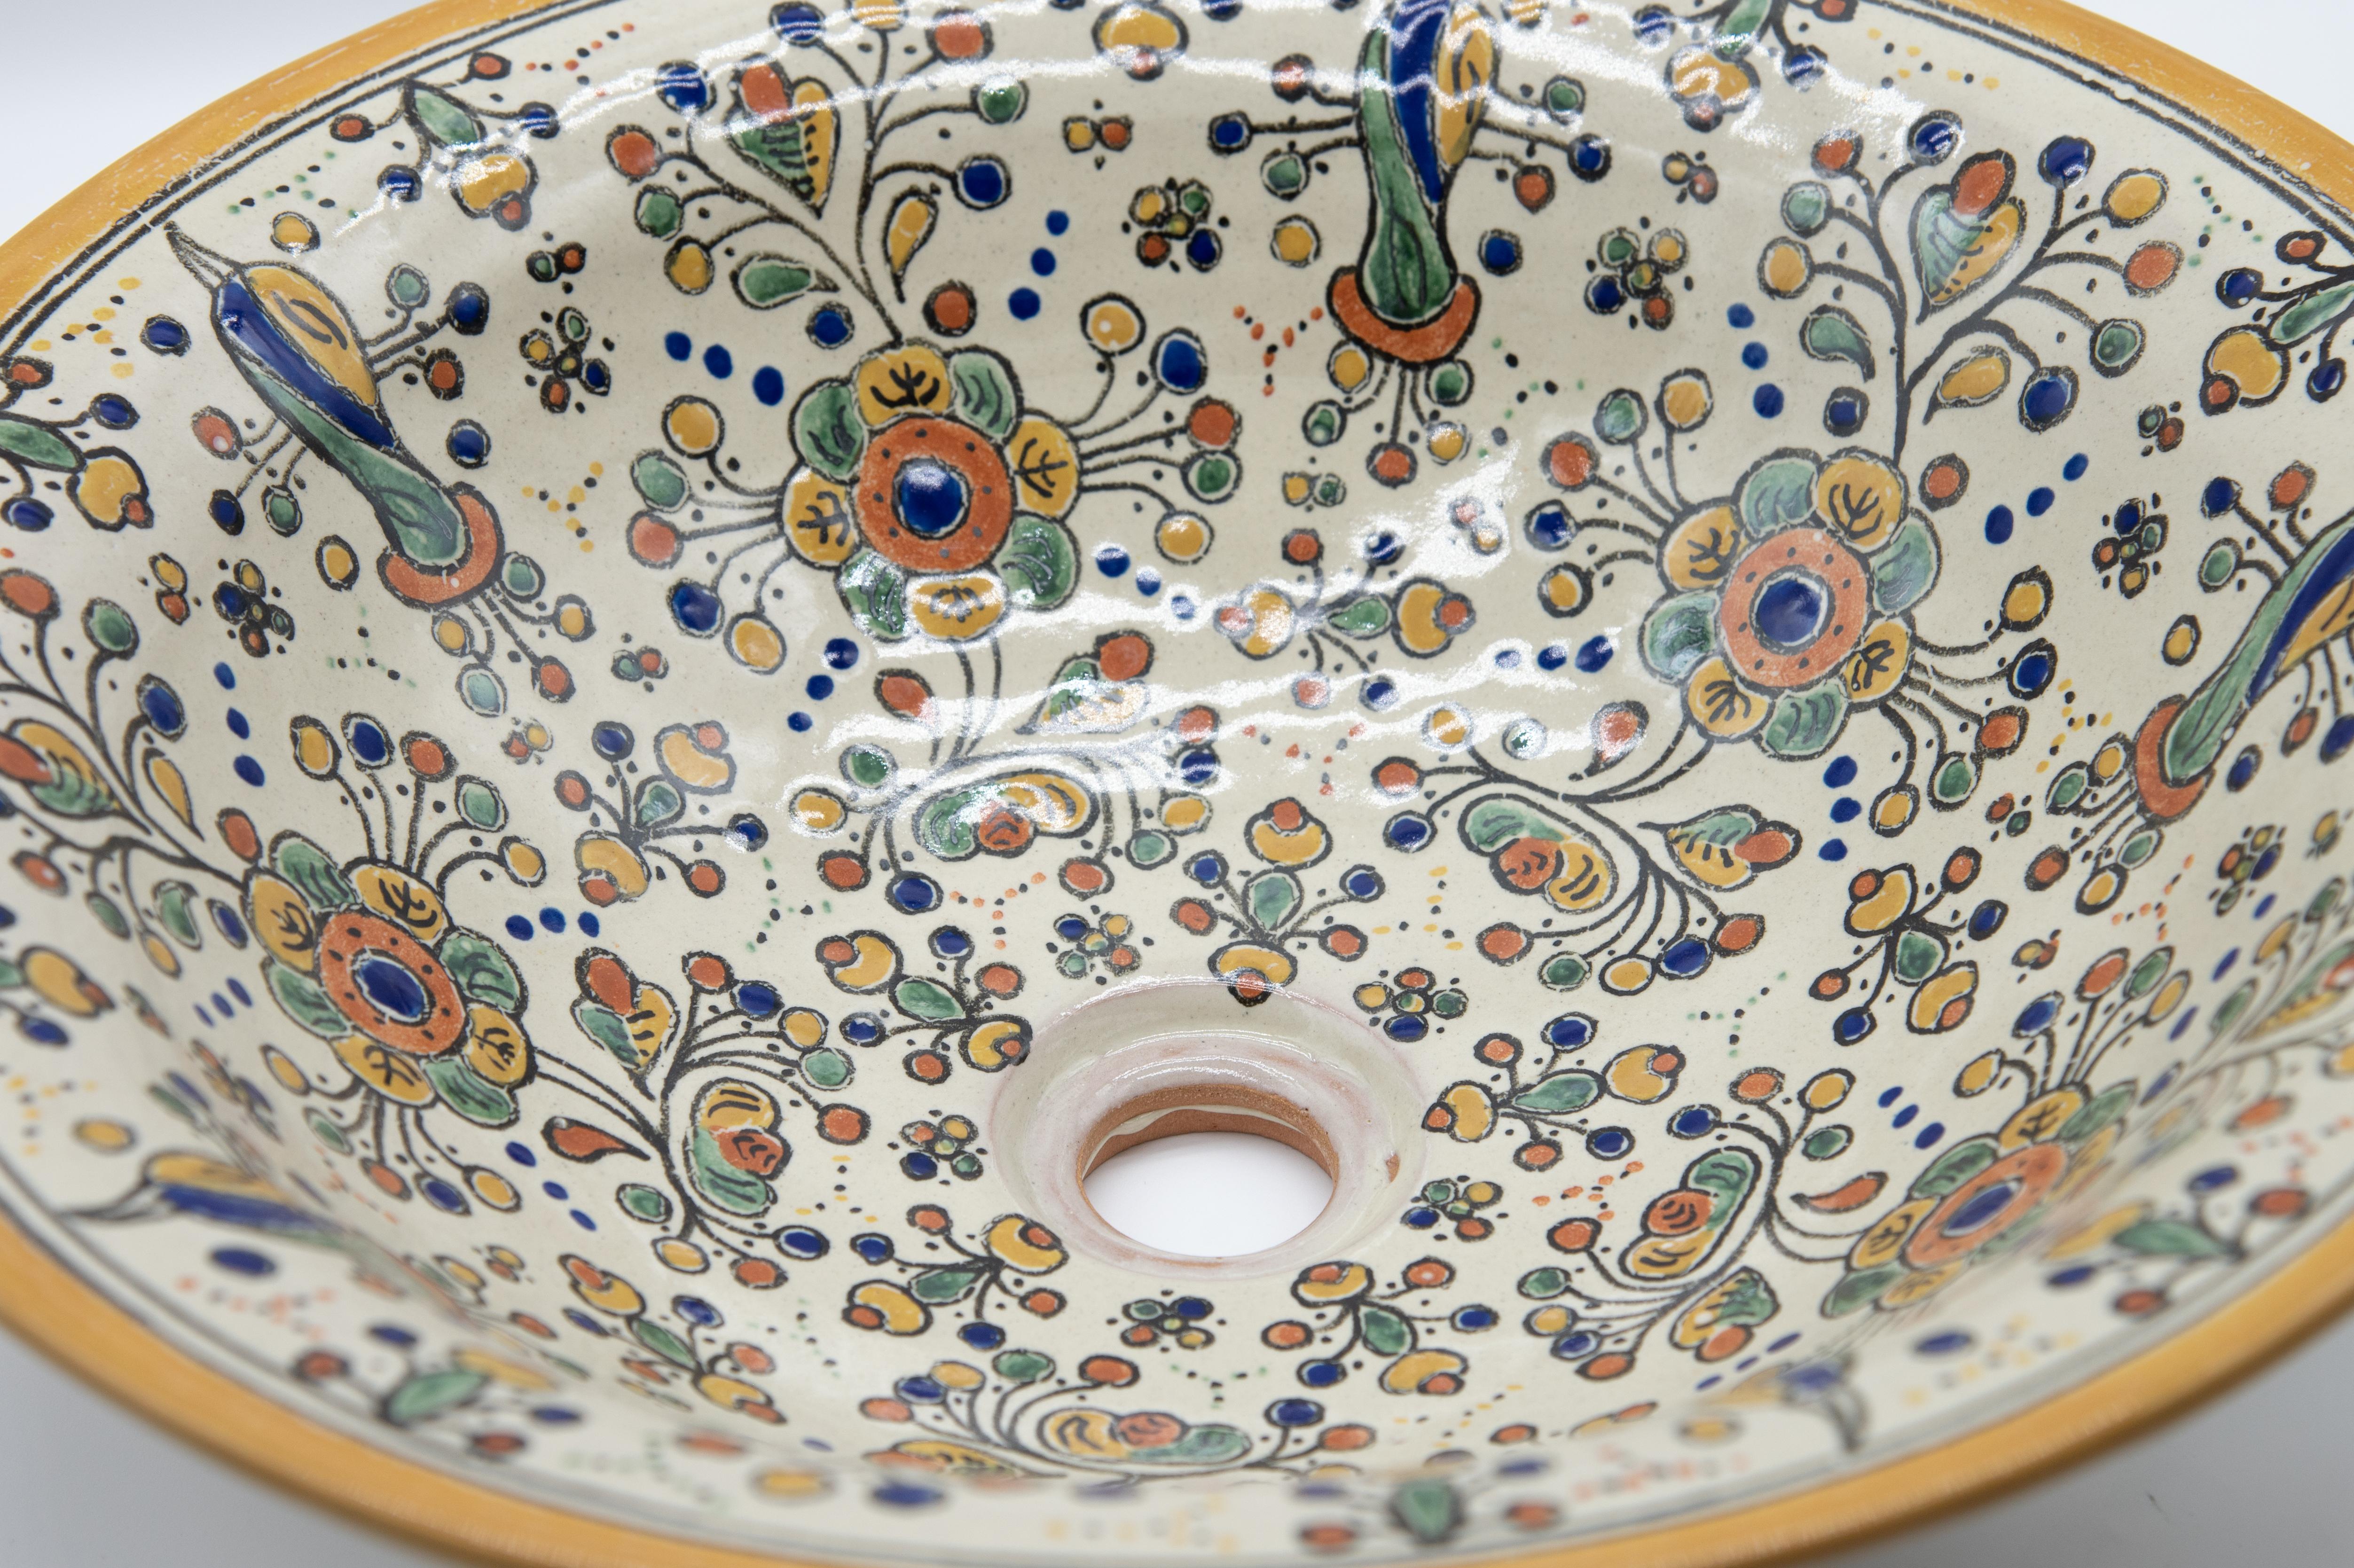 Hand-Crafted Talavera Decorative Lavabo Sink Folk Art Mexican Ceramic Spanish Colonial For Sale